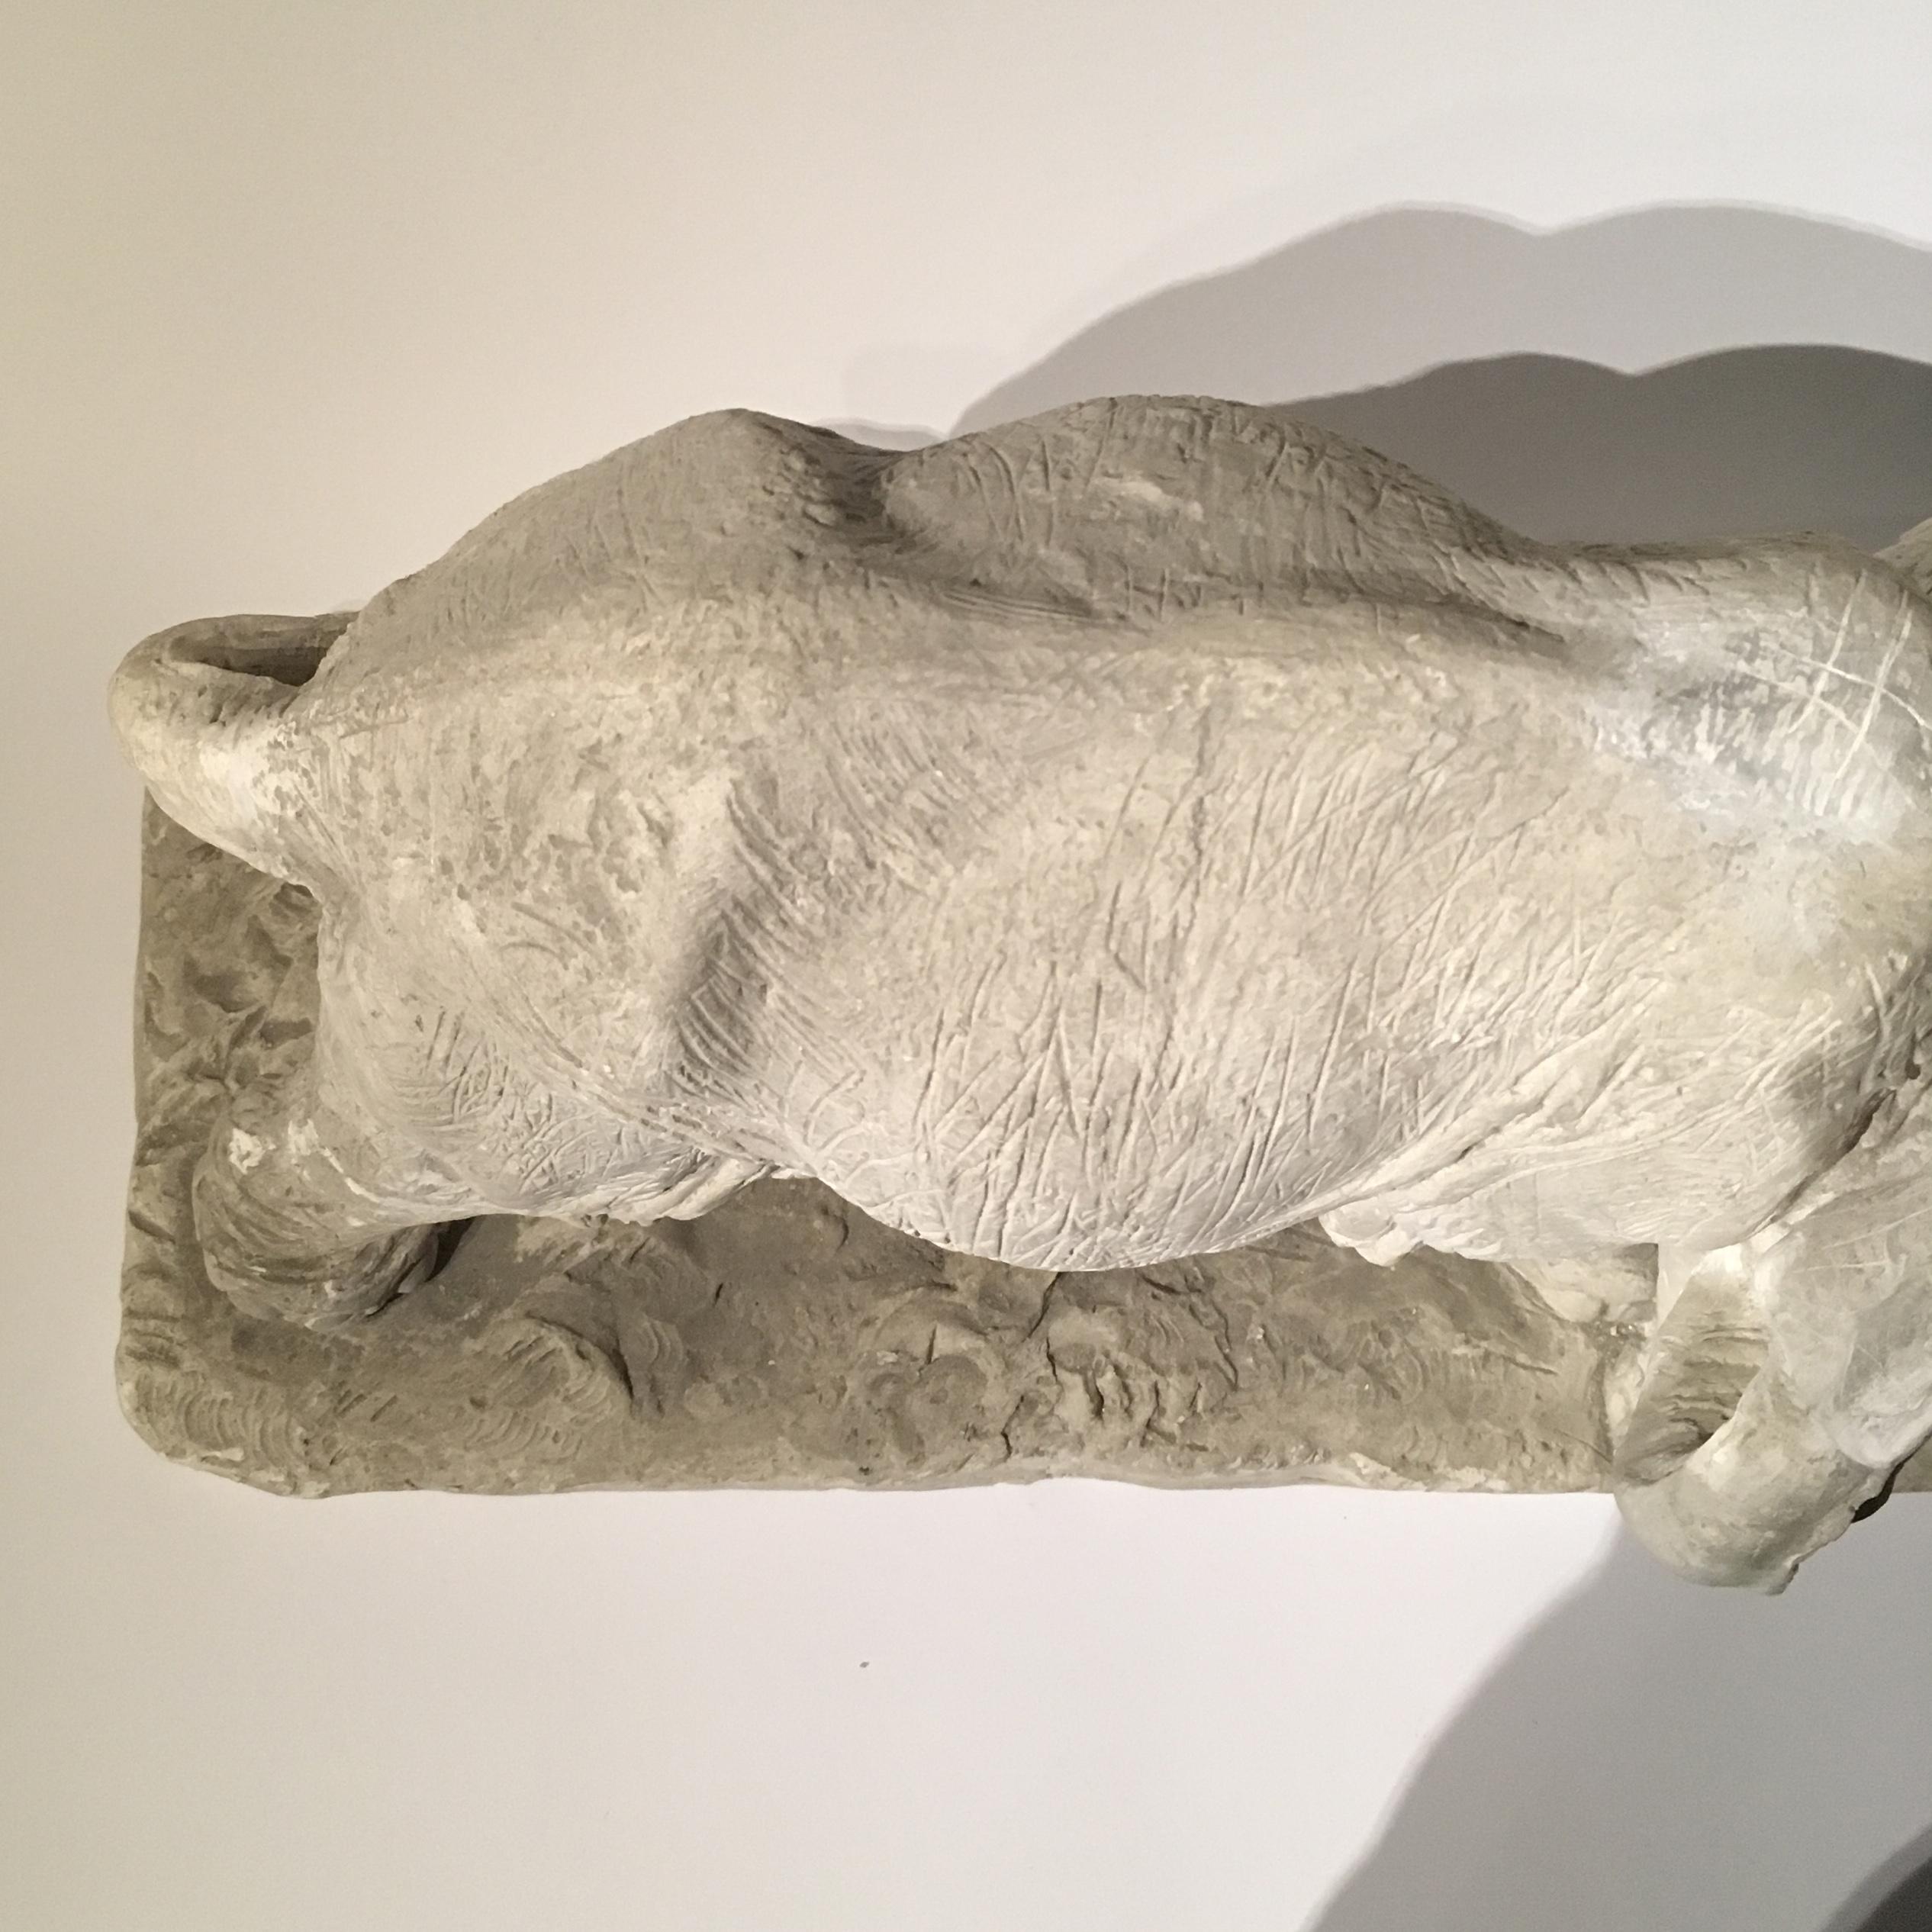 Italian Early 20th Century Plaster Sculpture Depicting an Elephant with its Offspring